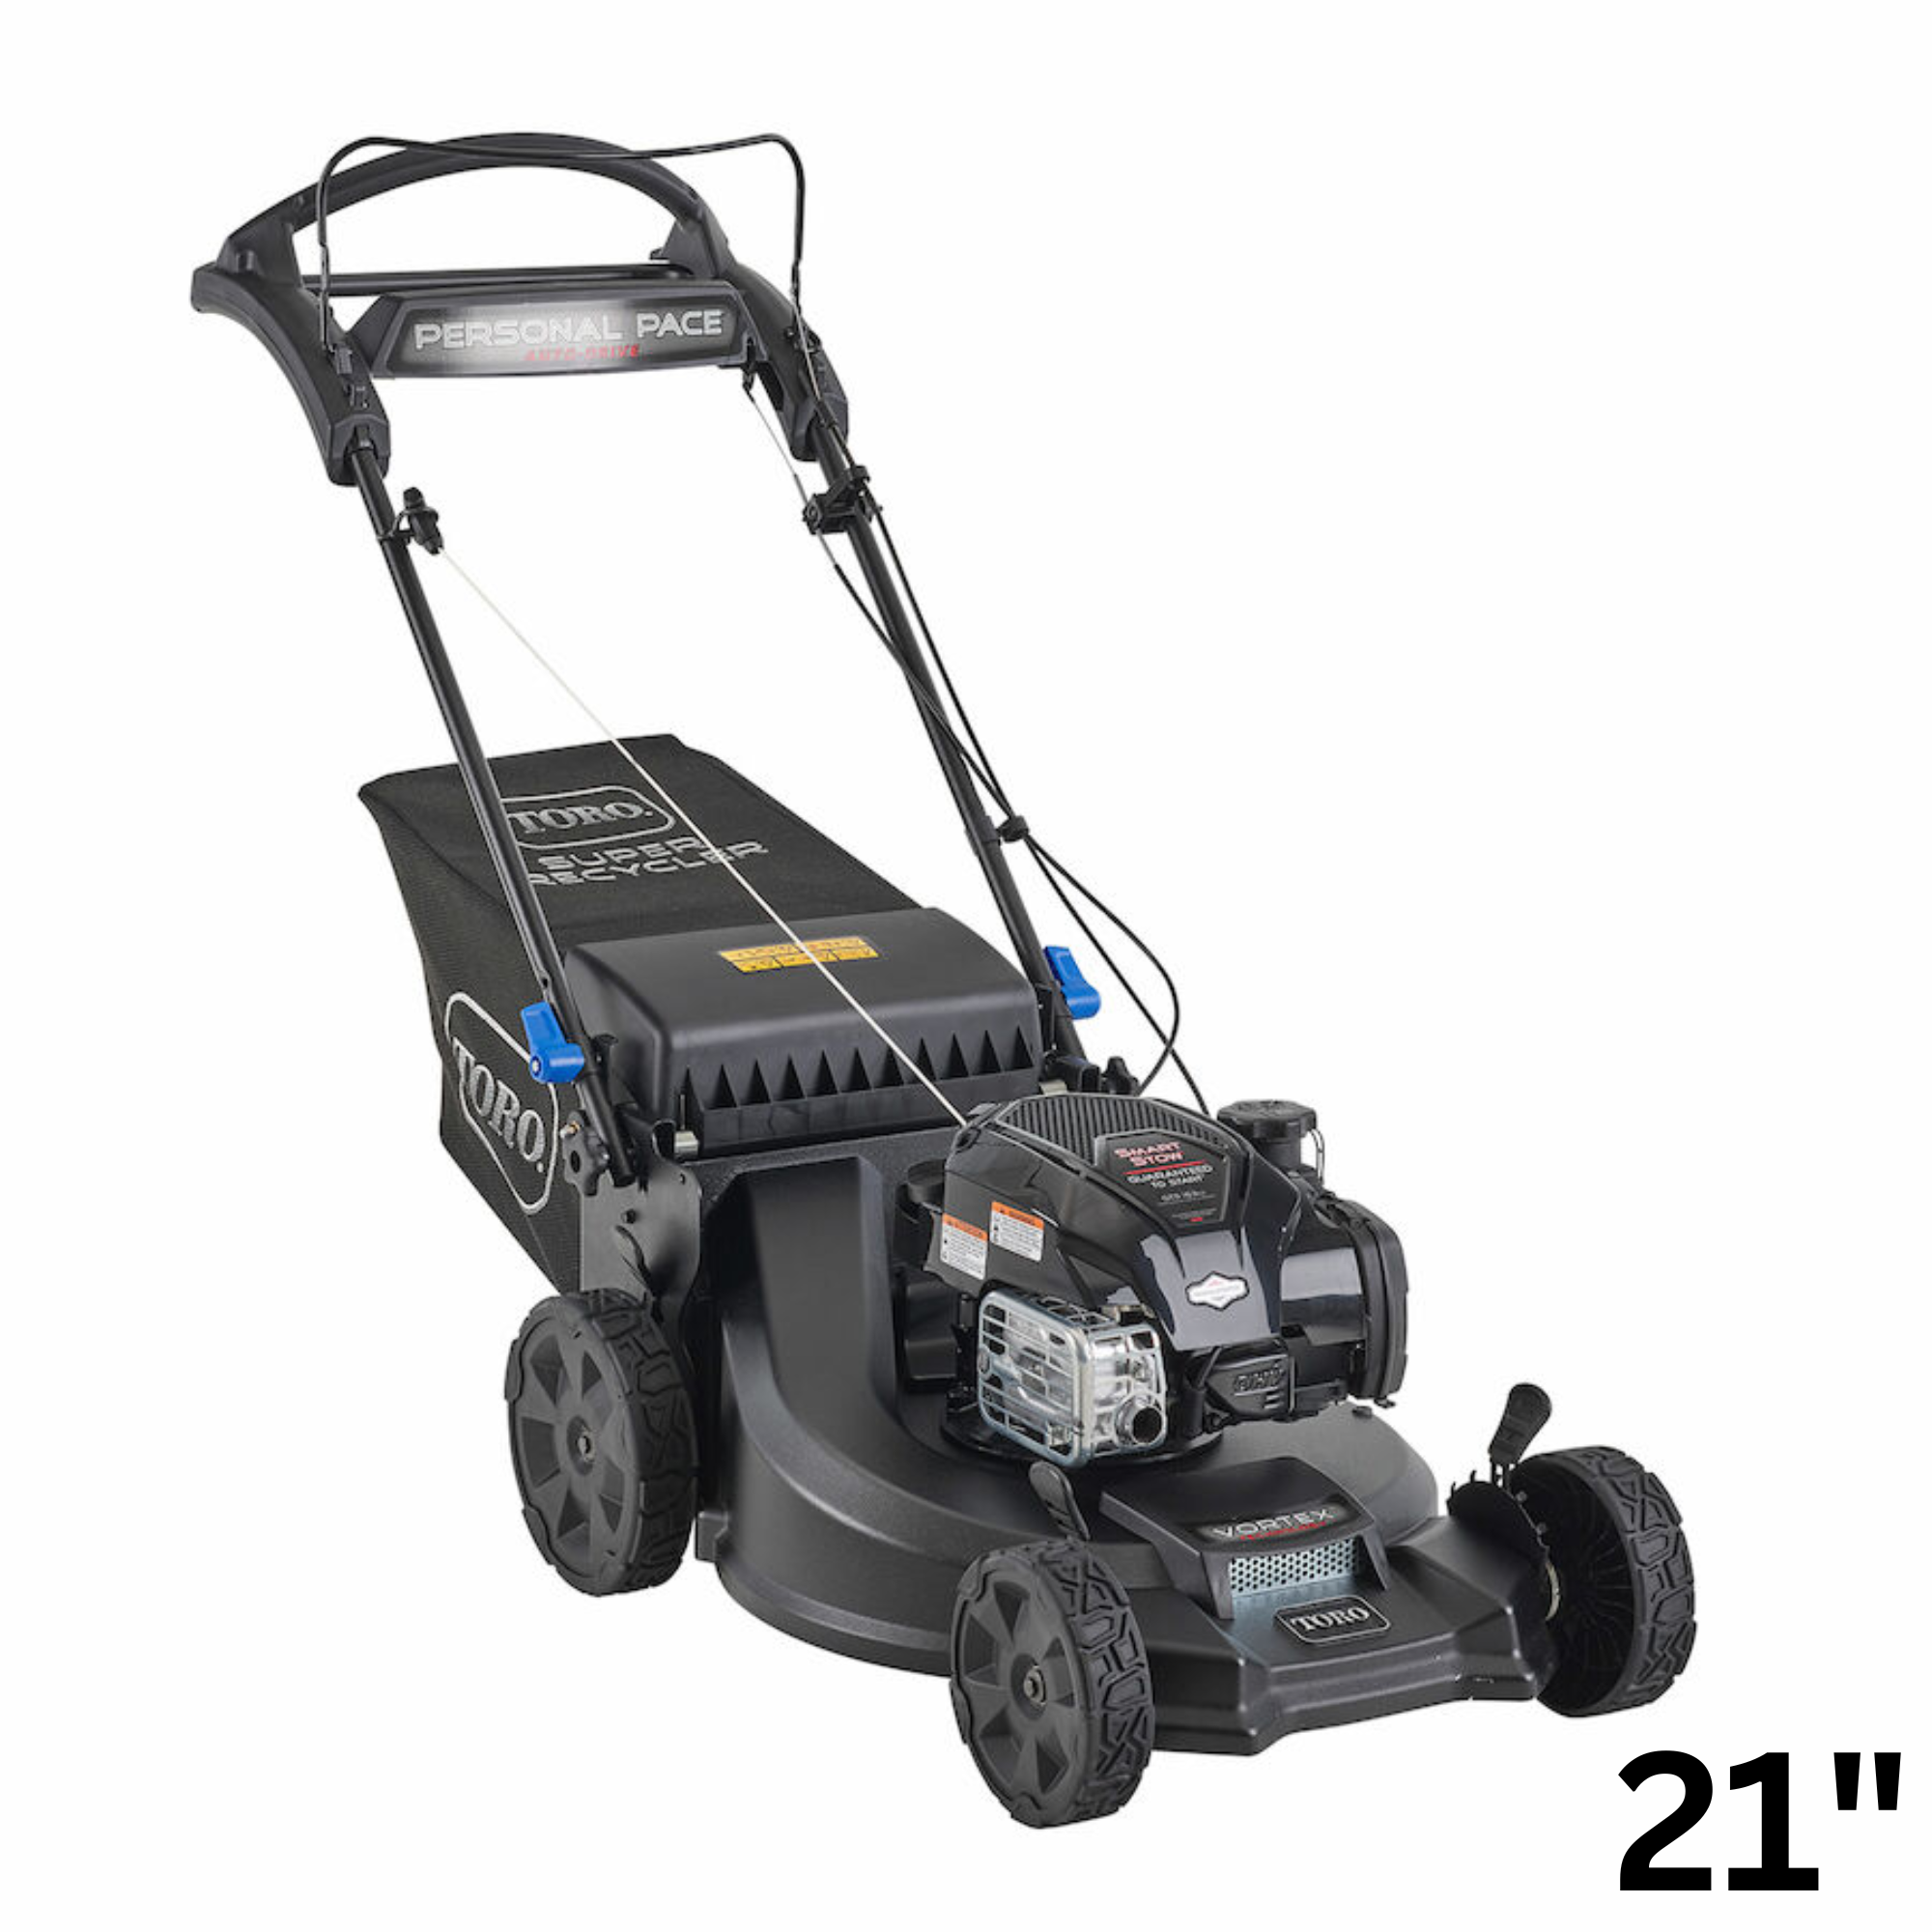 Toro 21 in. Super Recycler w/Personal Pace and SmartStow Gas Lawn Mower